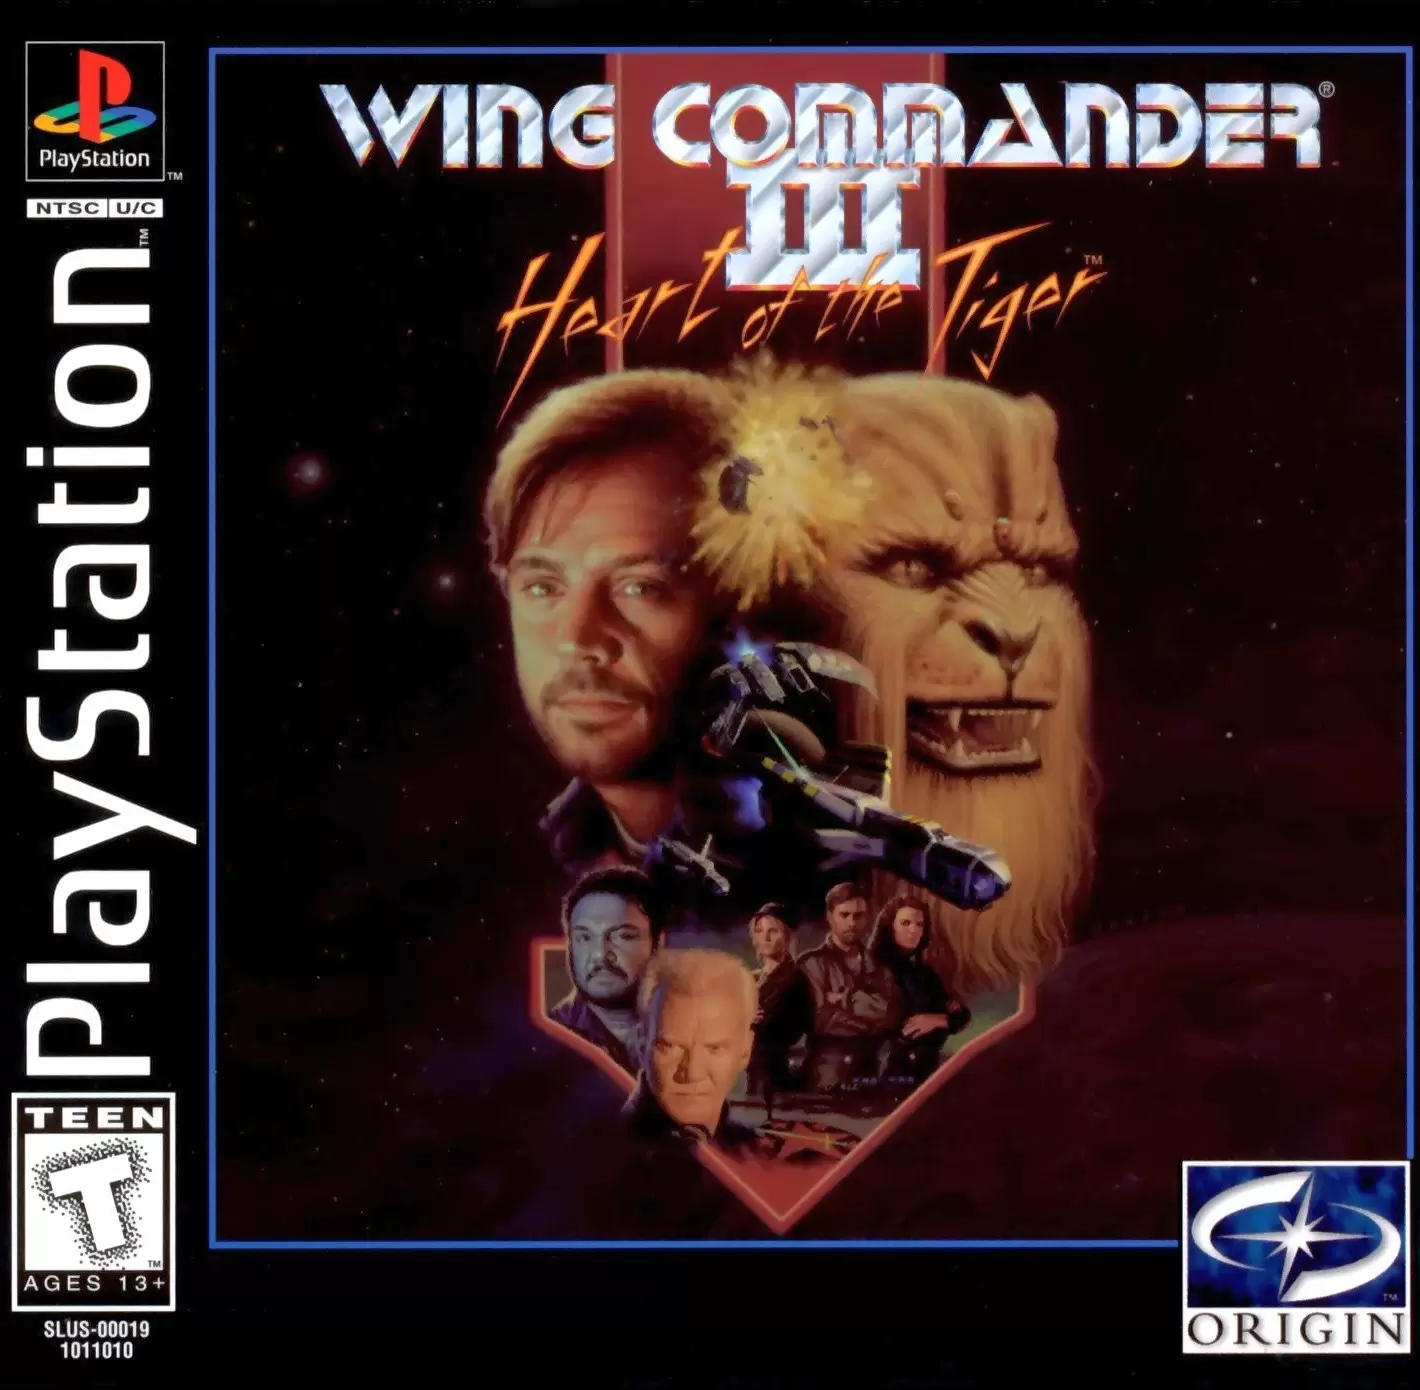 Playstation games - Wing Commander III: Heart of the Tiger